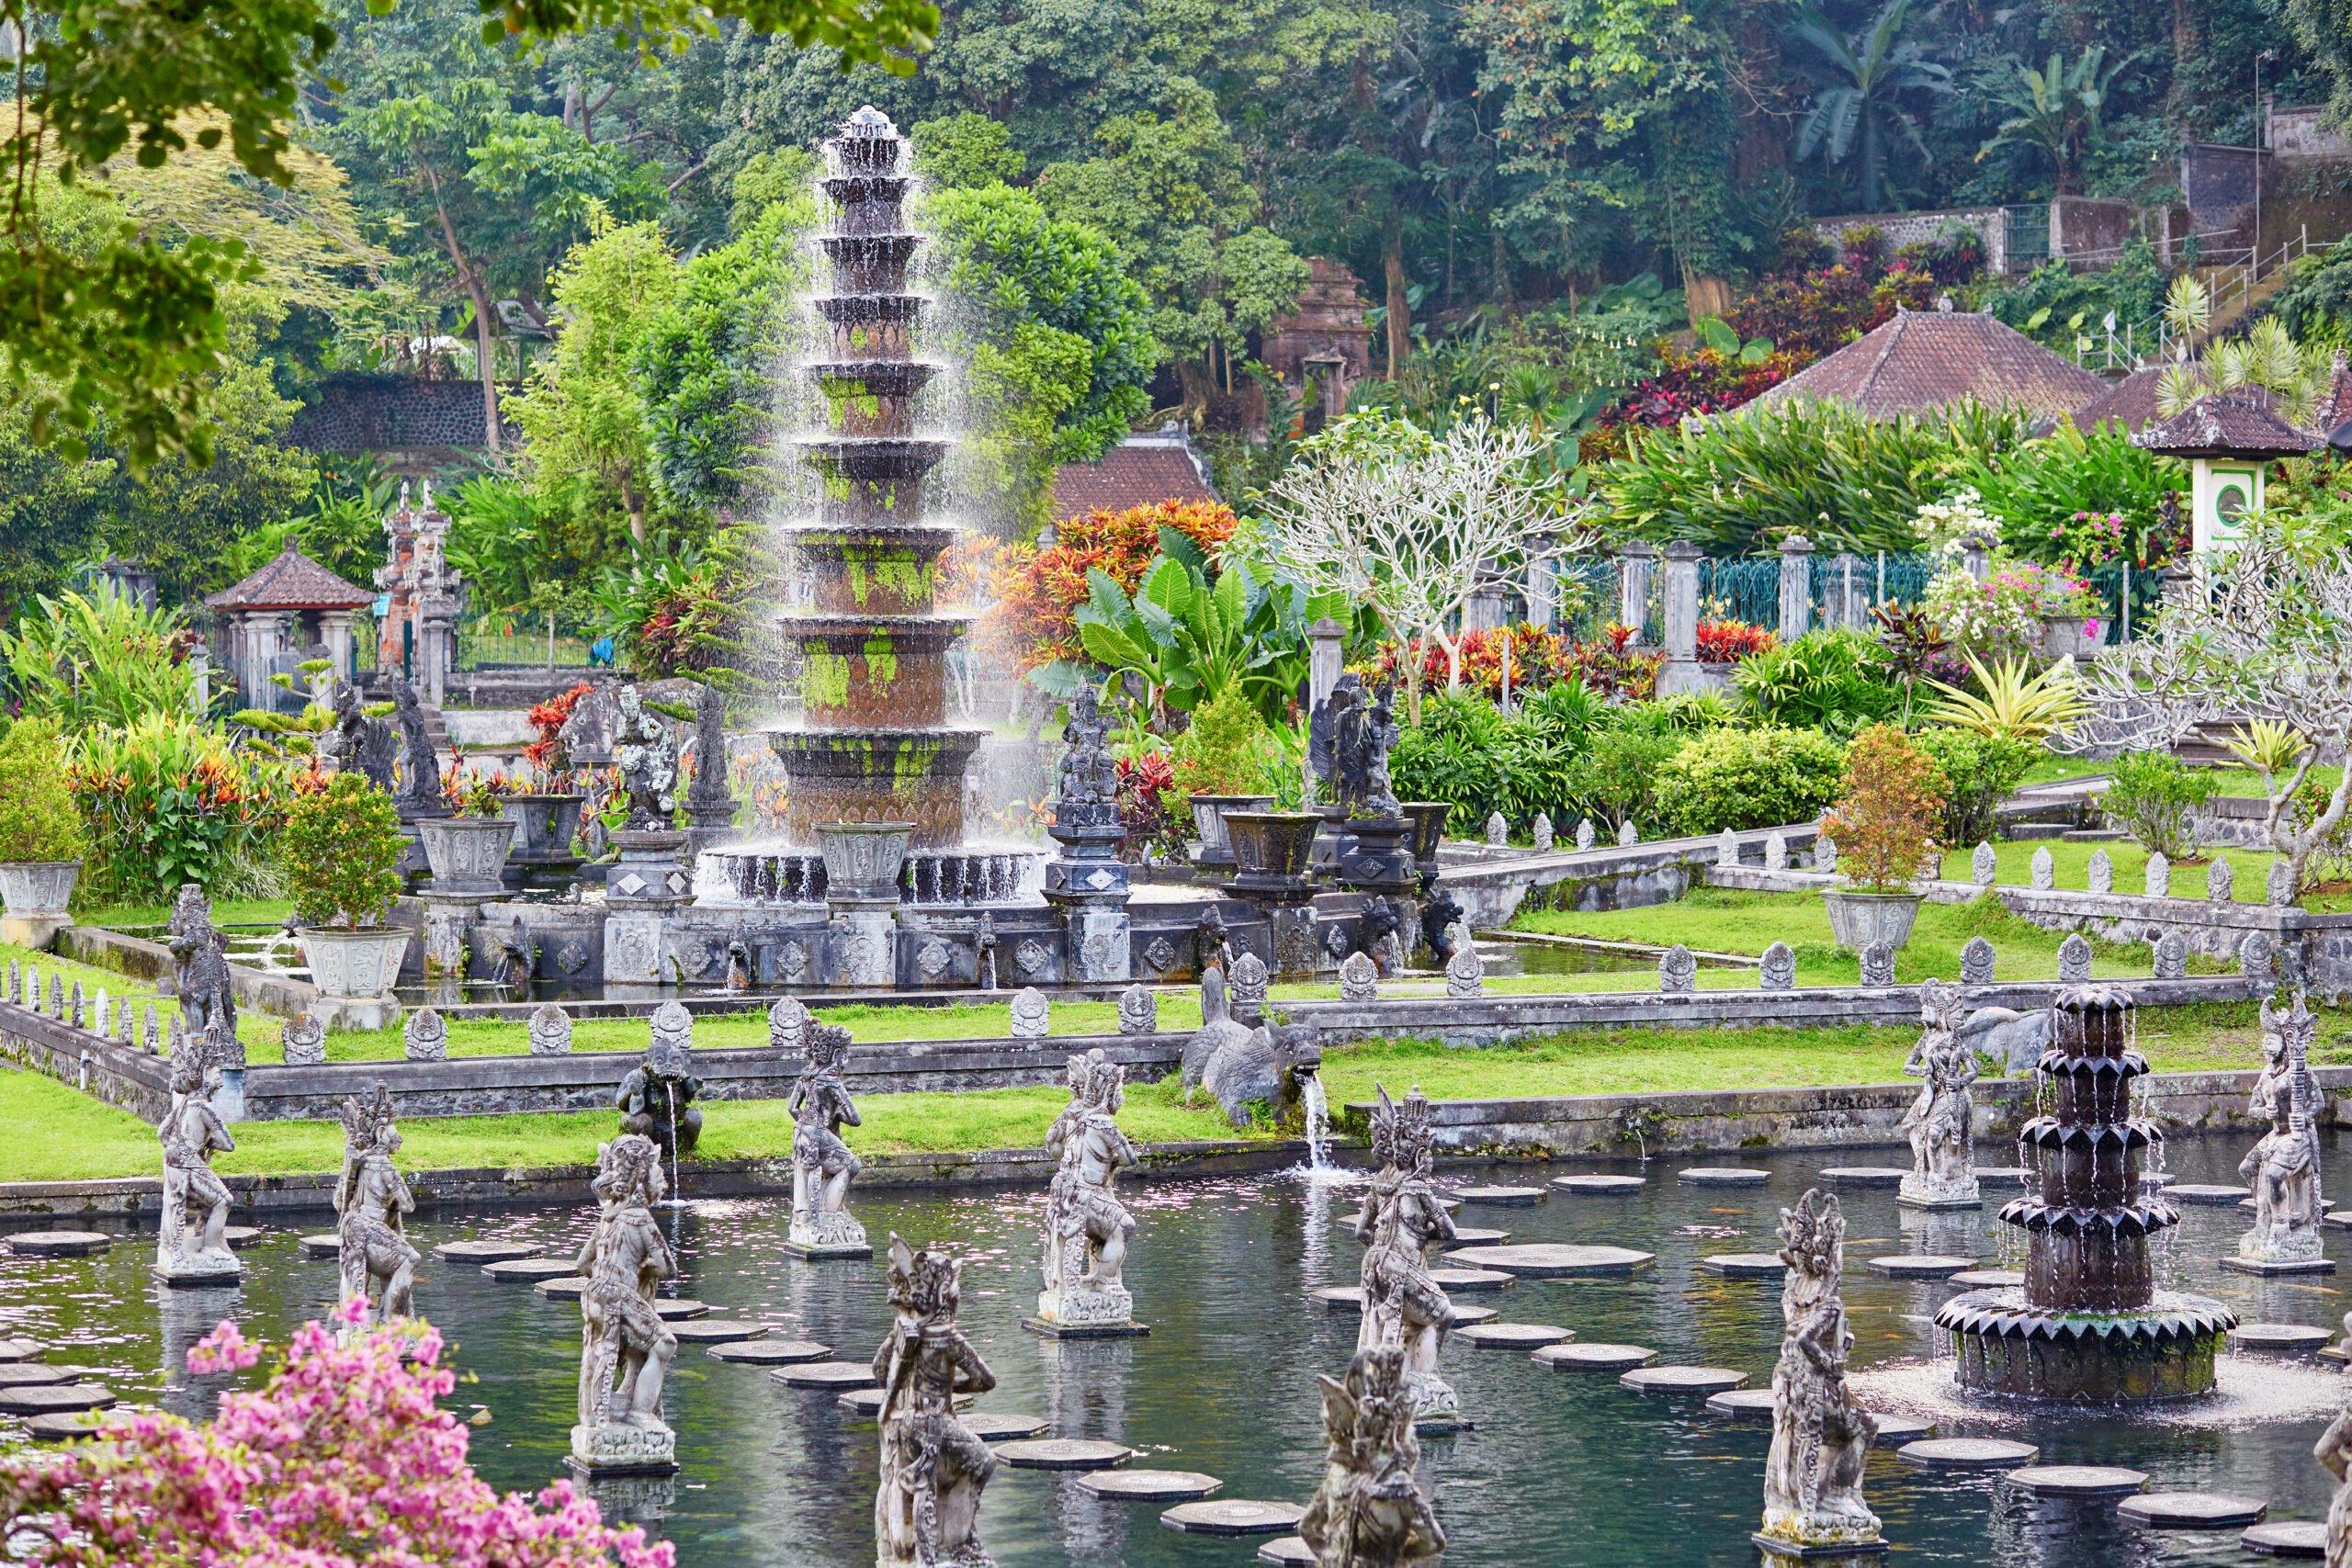 Discover The Stunning Water Temple On The Eastern Bali Experience From Ubud, Nusa Dua, Tanjung Benoa, Seminyak And Candi Dasa